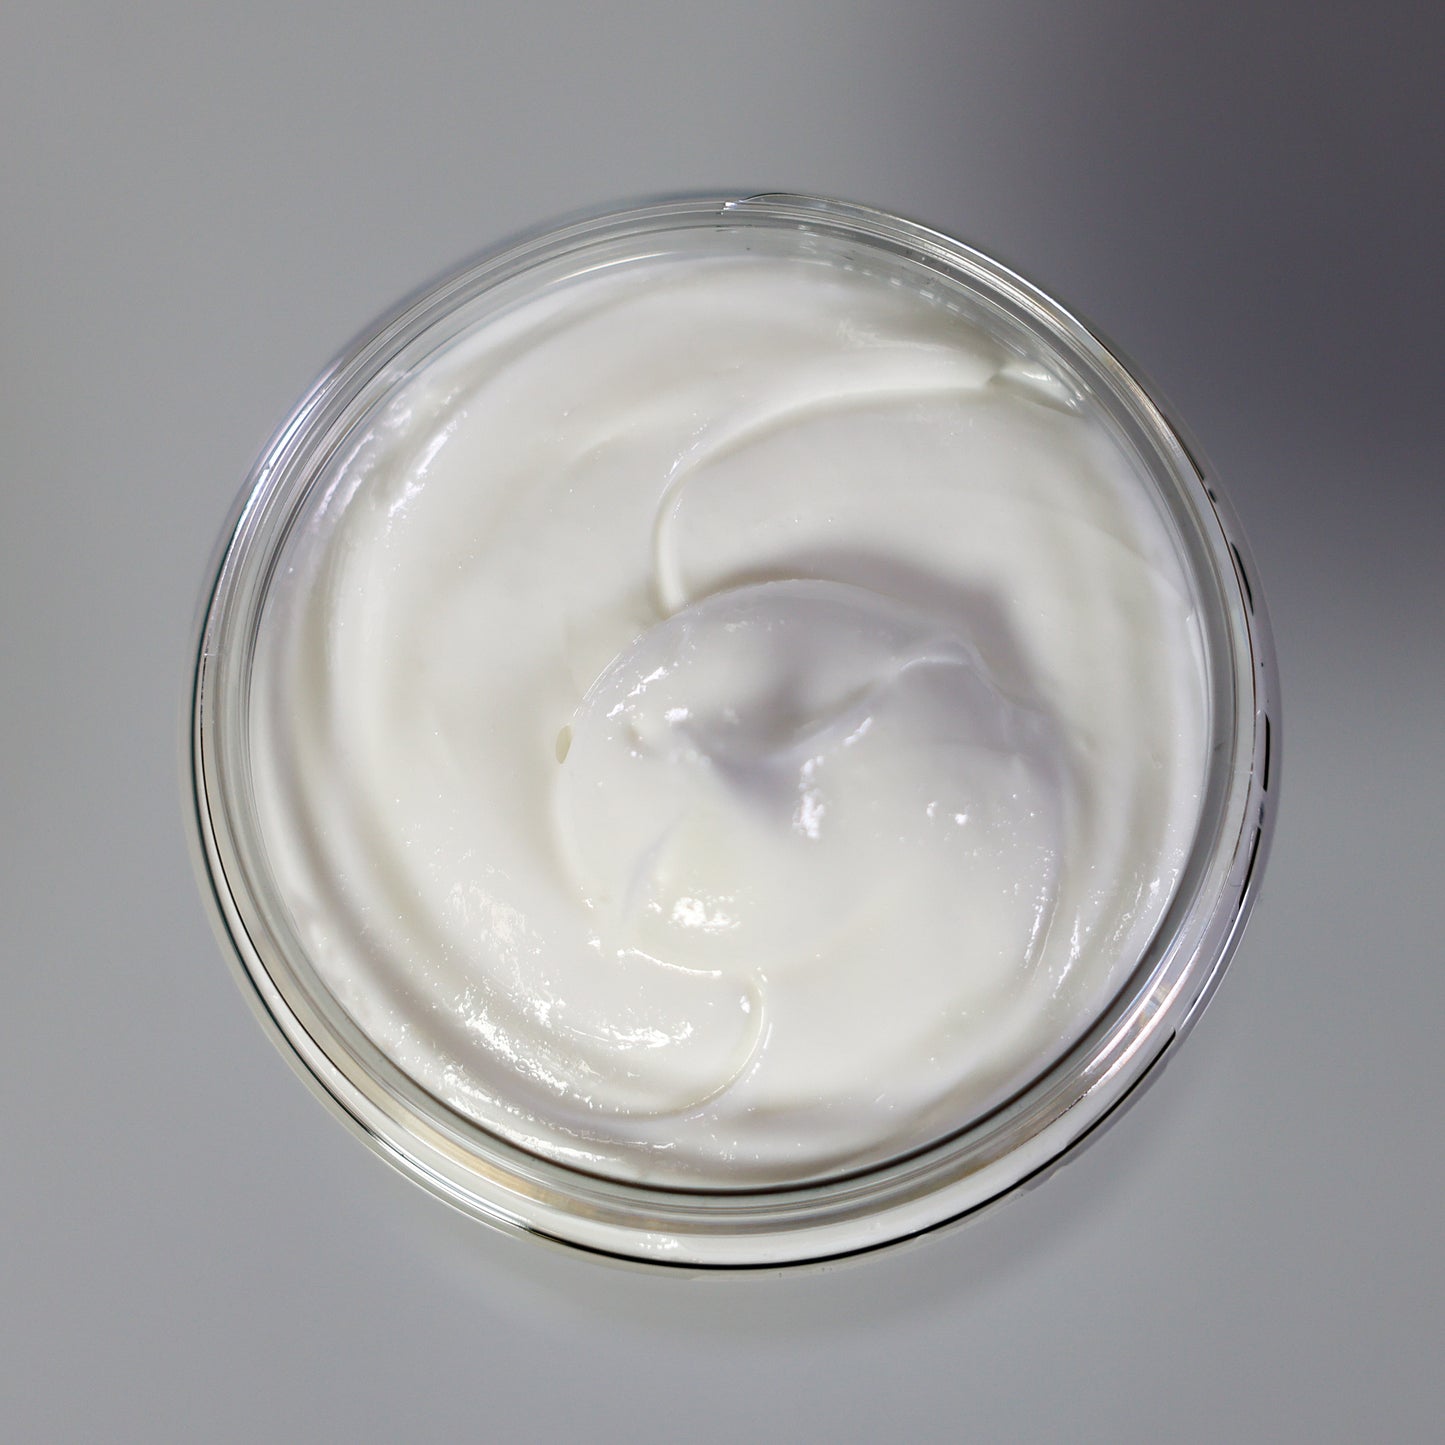 Tropical Temptation 62 Hydrating Body Butter (Cheirosa ‘62 Type)